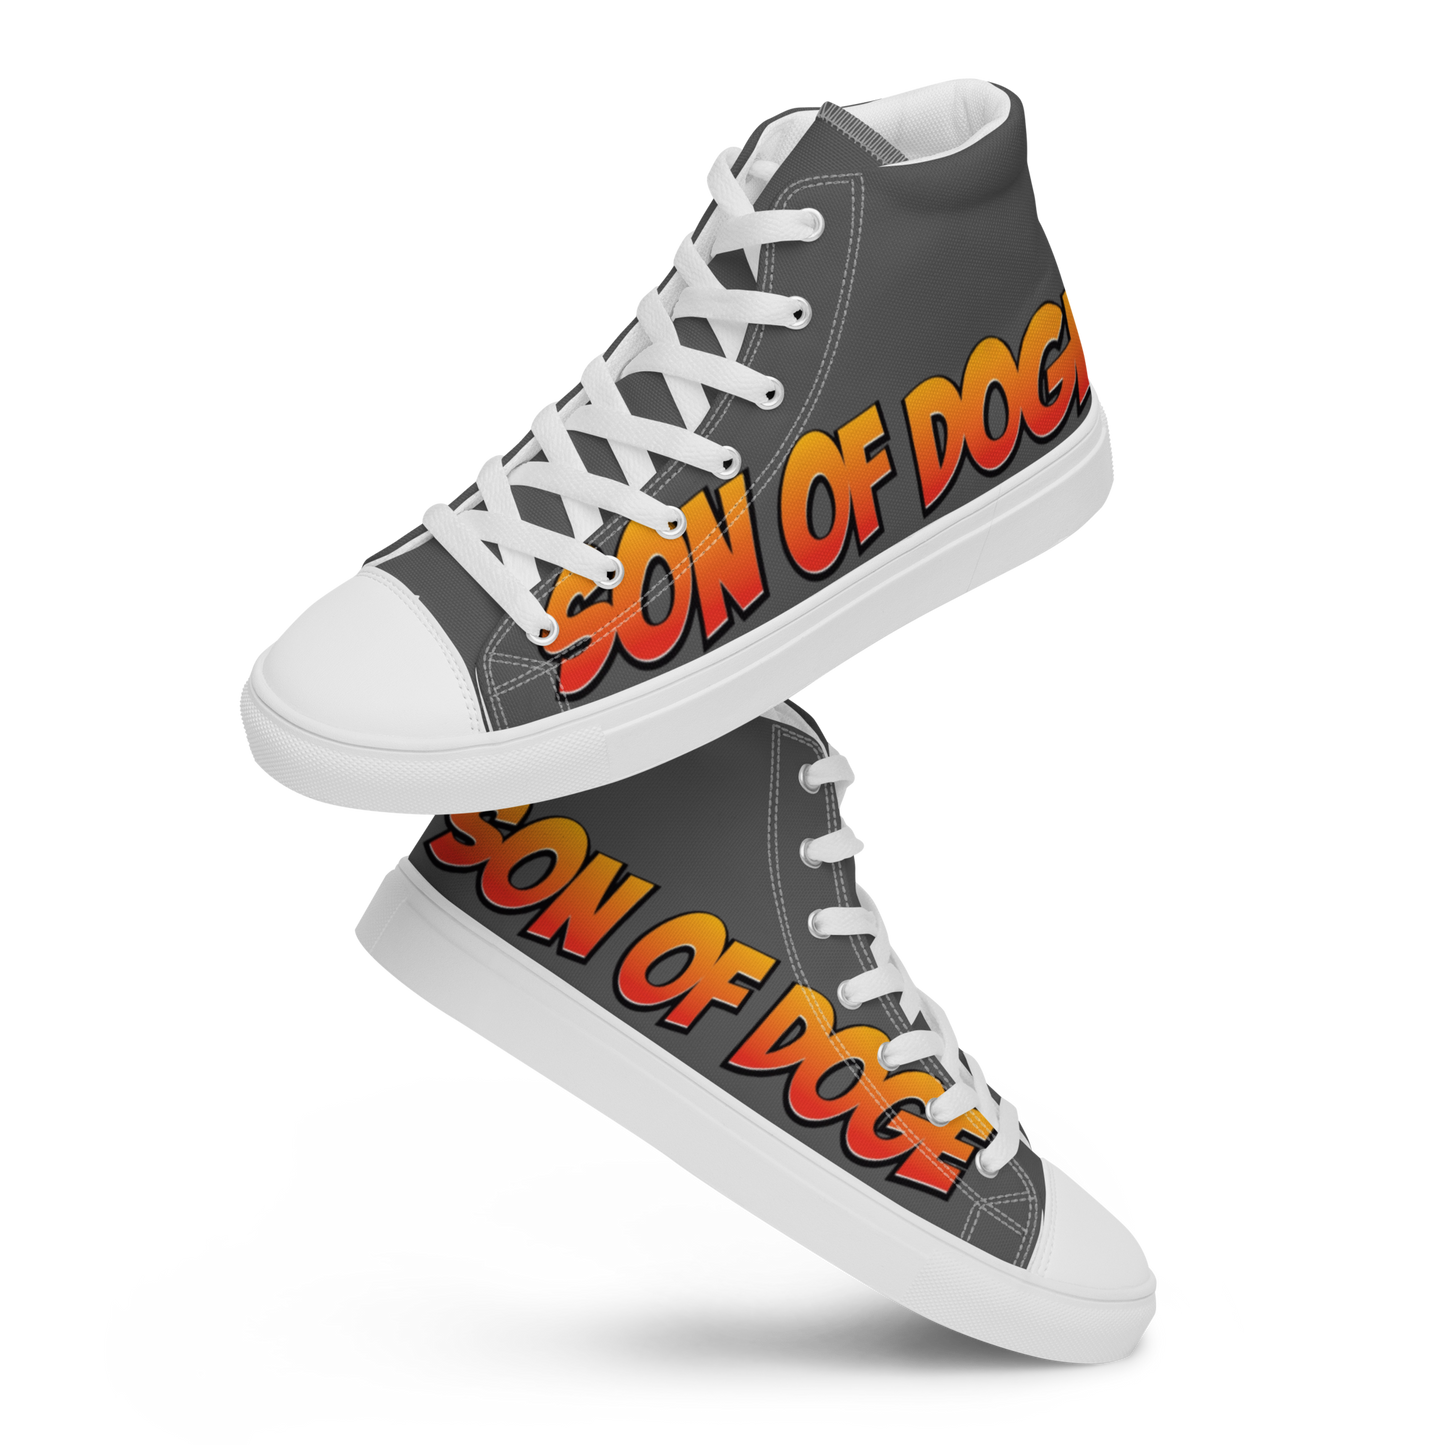 Son Of Doge - Men’s high top canvas shoes (Grey)